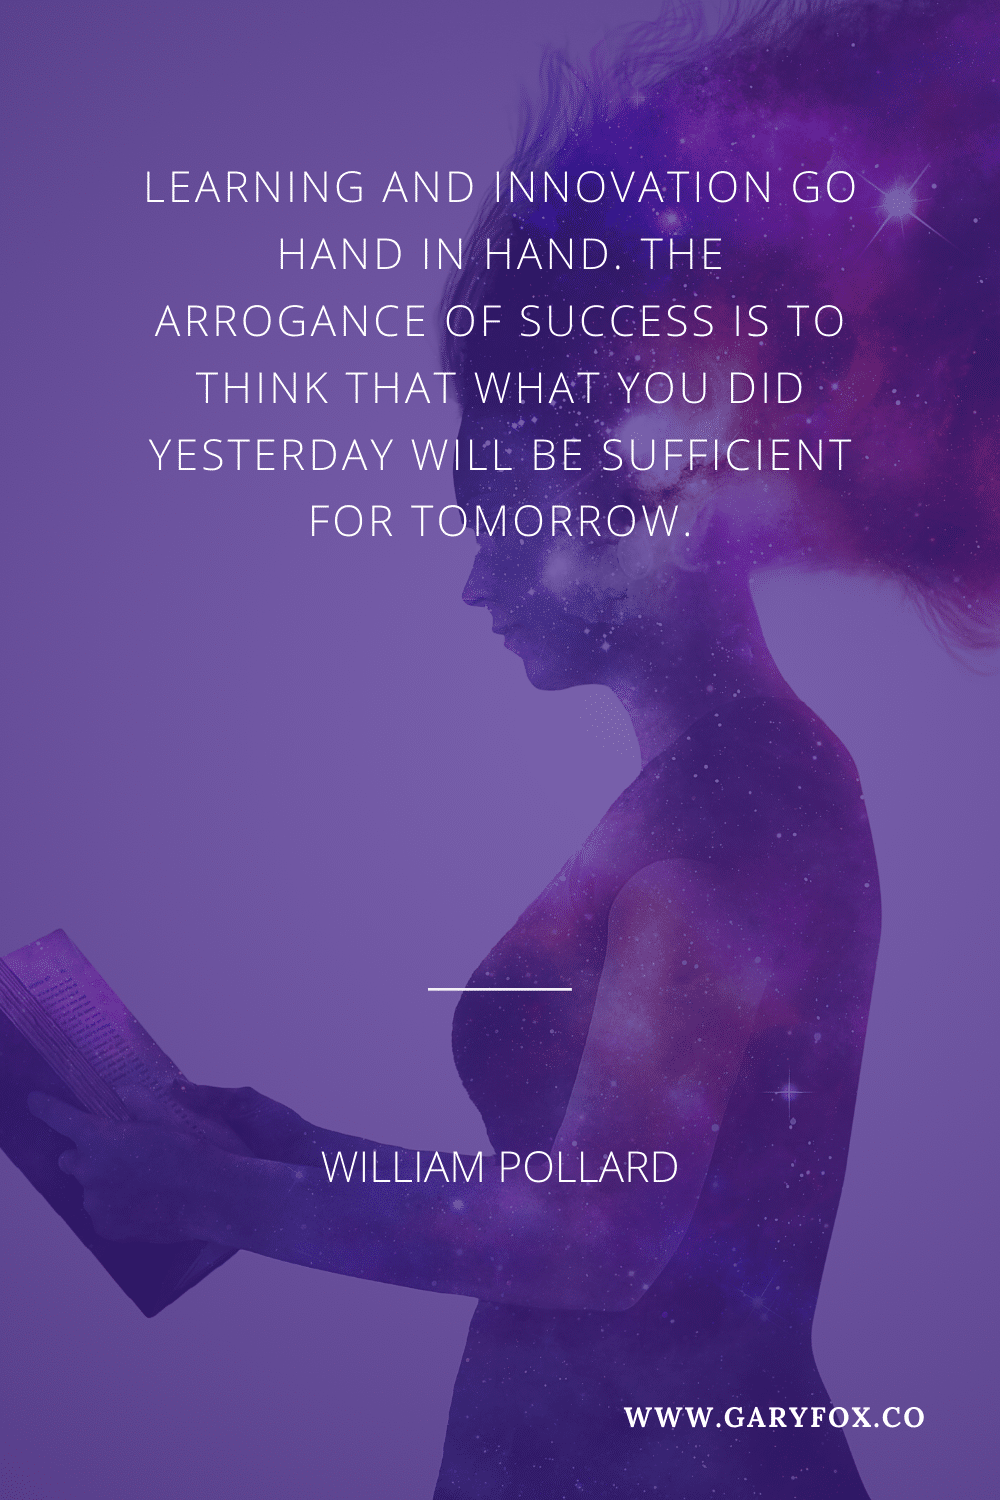 Learning And Innovation Go Hand In Hand. The Arrogance Of Success Is To Think That What You Did Yesterday Will Be Sufficient For Tomorrow.